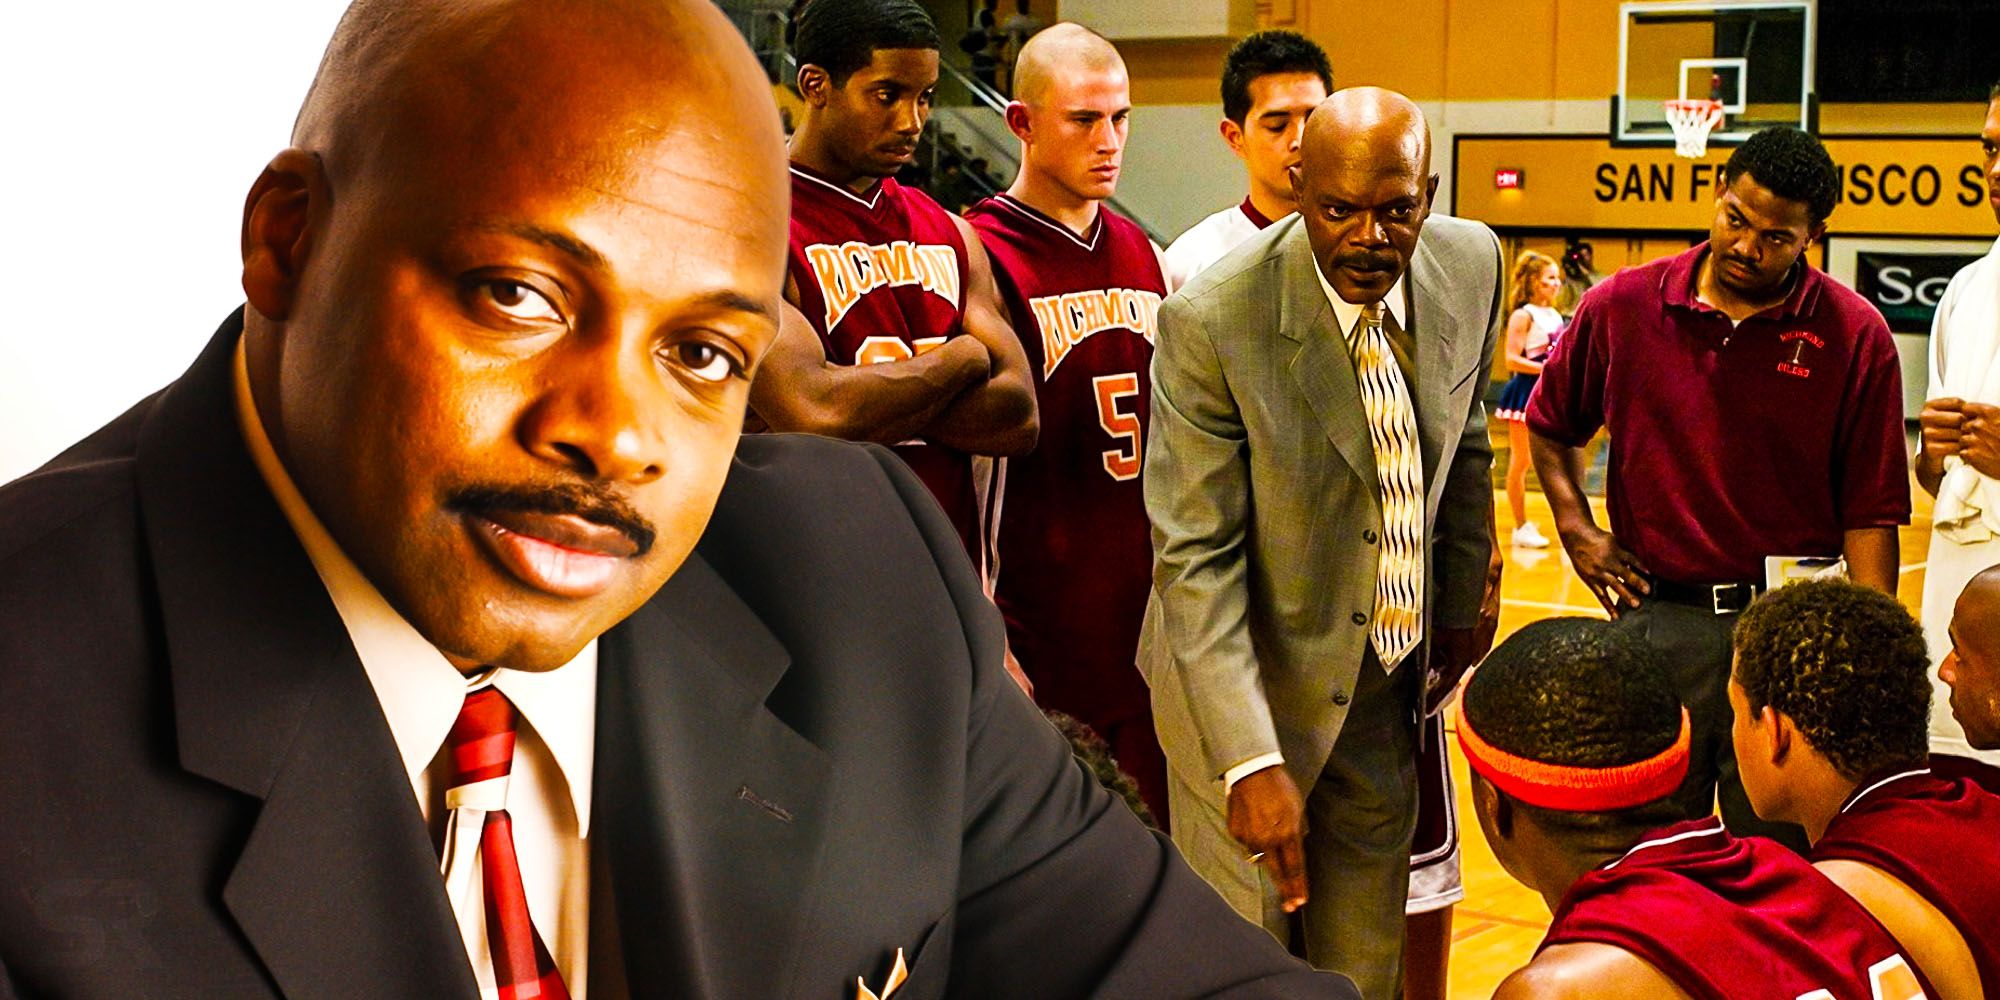 Coach Carter True Story: How Much Is Real & What Happened Next